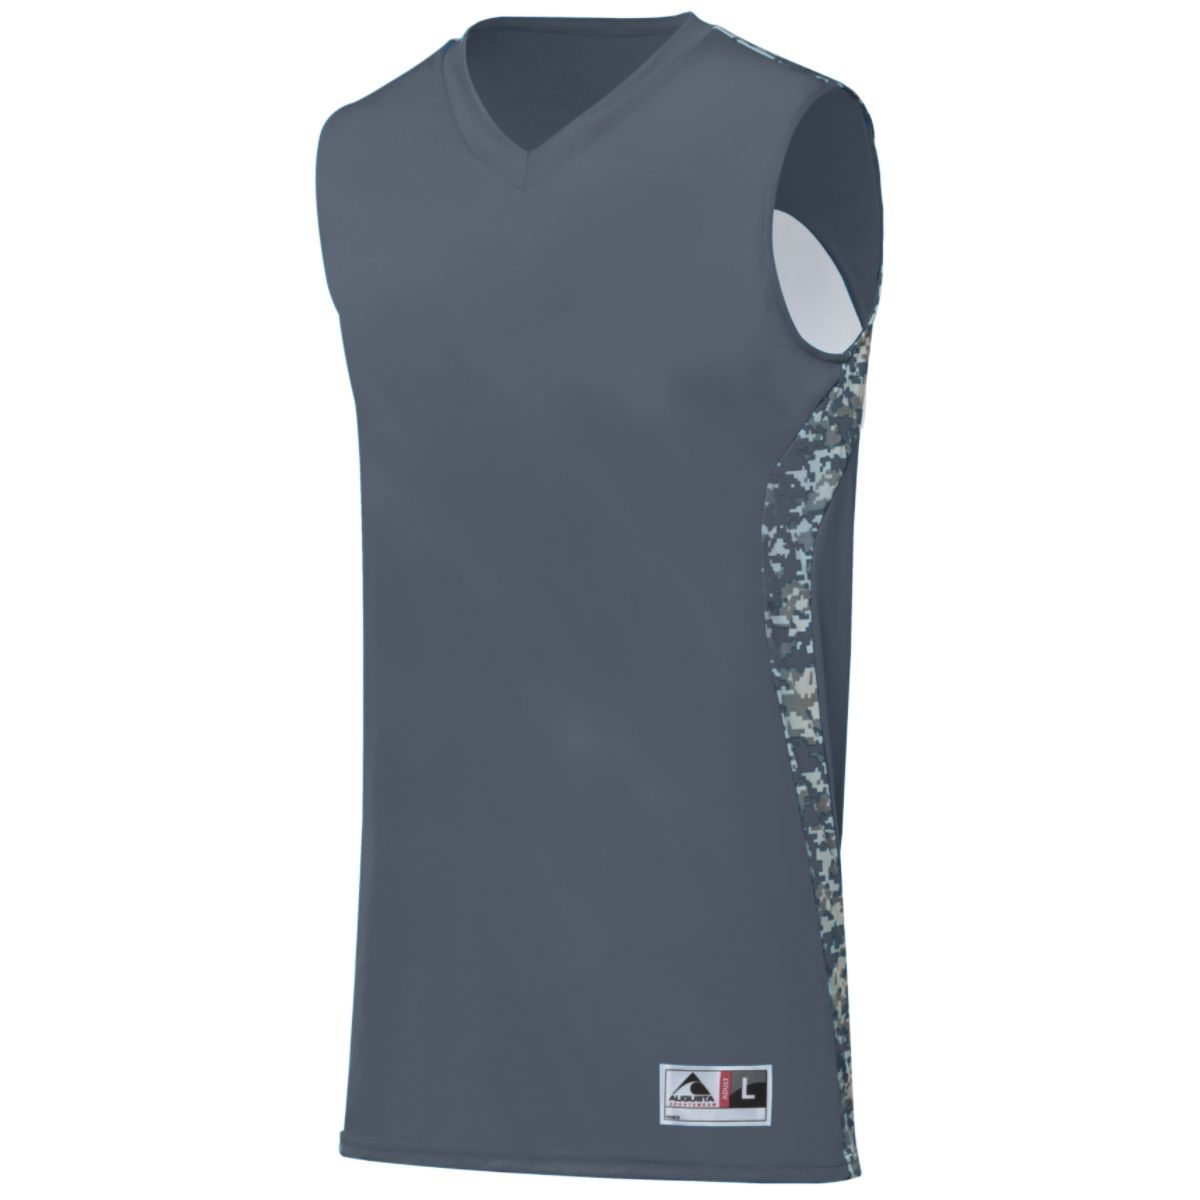 Augusta Sportswear Hook Shot Reversible Jersey in Graphite/White Digi  -Part of the Adult, Adult-Jersey, Augusta-Products, Basketball, Shirts, All-Sports, All-Sports-1 product lines at KanaleyCreations.com